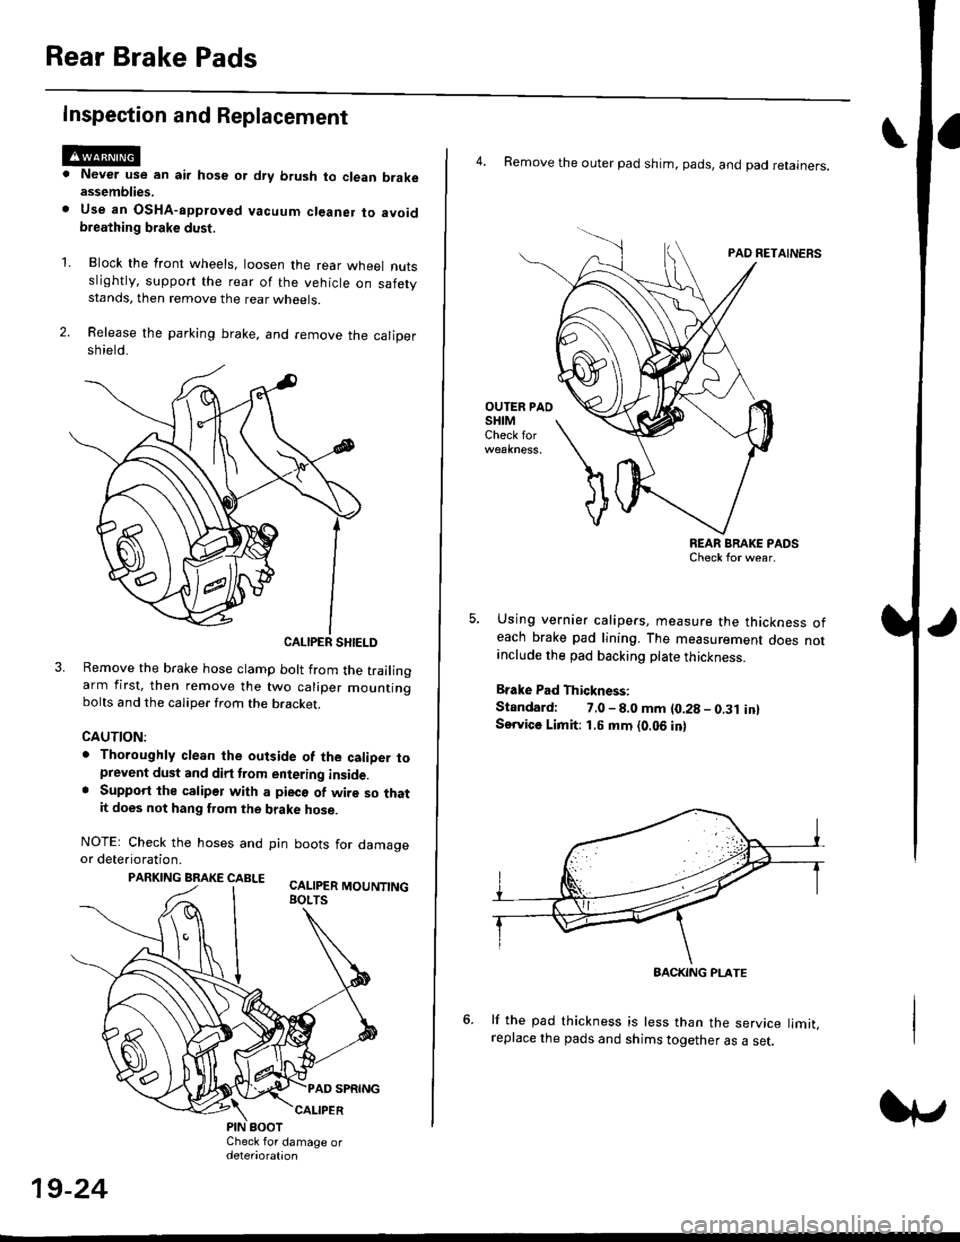 HONDA CIVIC 1999 6.G User Guide Rear Brake Pads
Inspection and Replacement
Never use an air hose or dry brush to clean brakeassemblies.
Use an OsHA-apptoved vacuum cl€aner to avoidbreathing brake dust,
Block the front wheels, loos